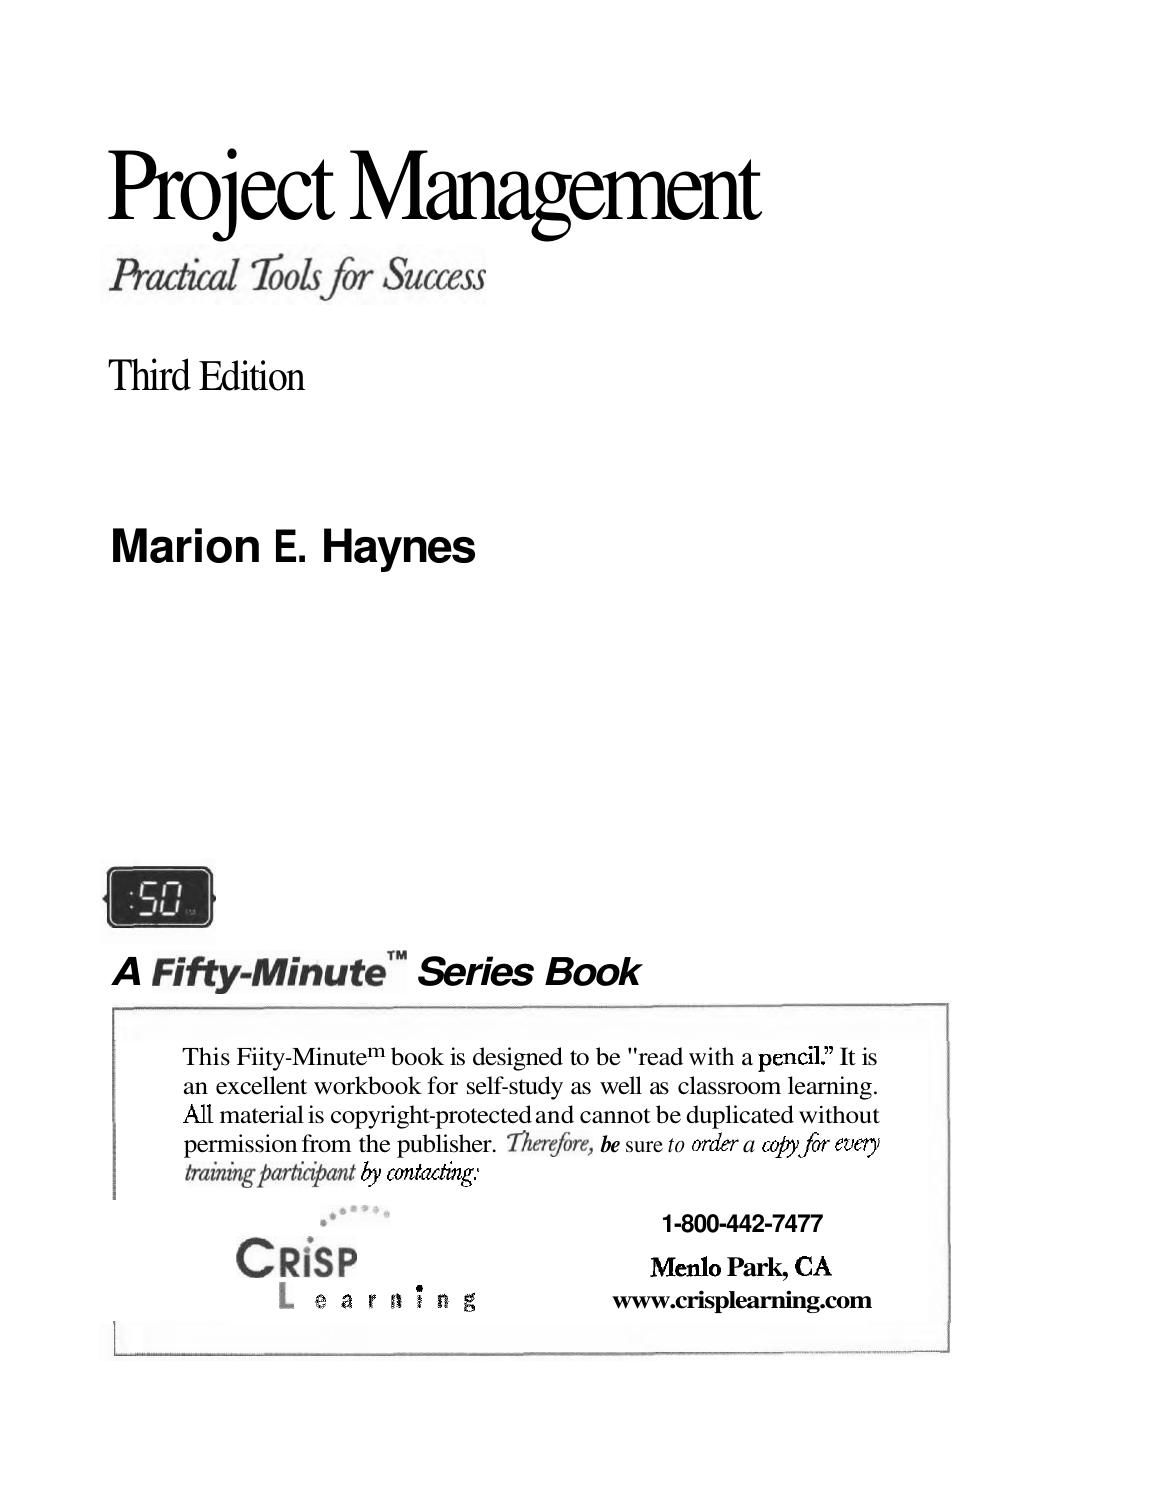 Project ManagementA Practical Guide for Success 2002